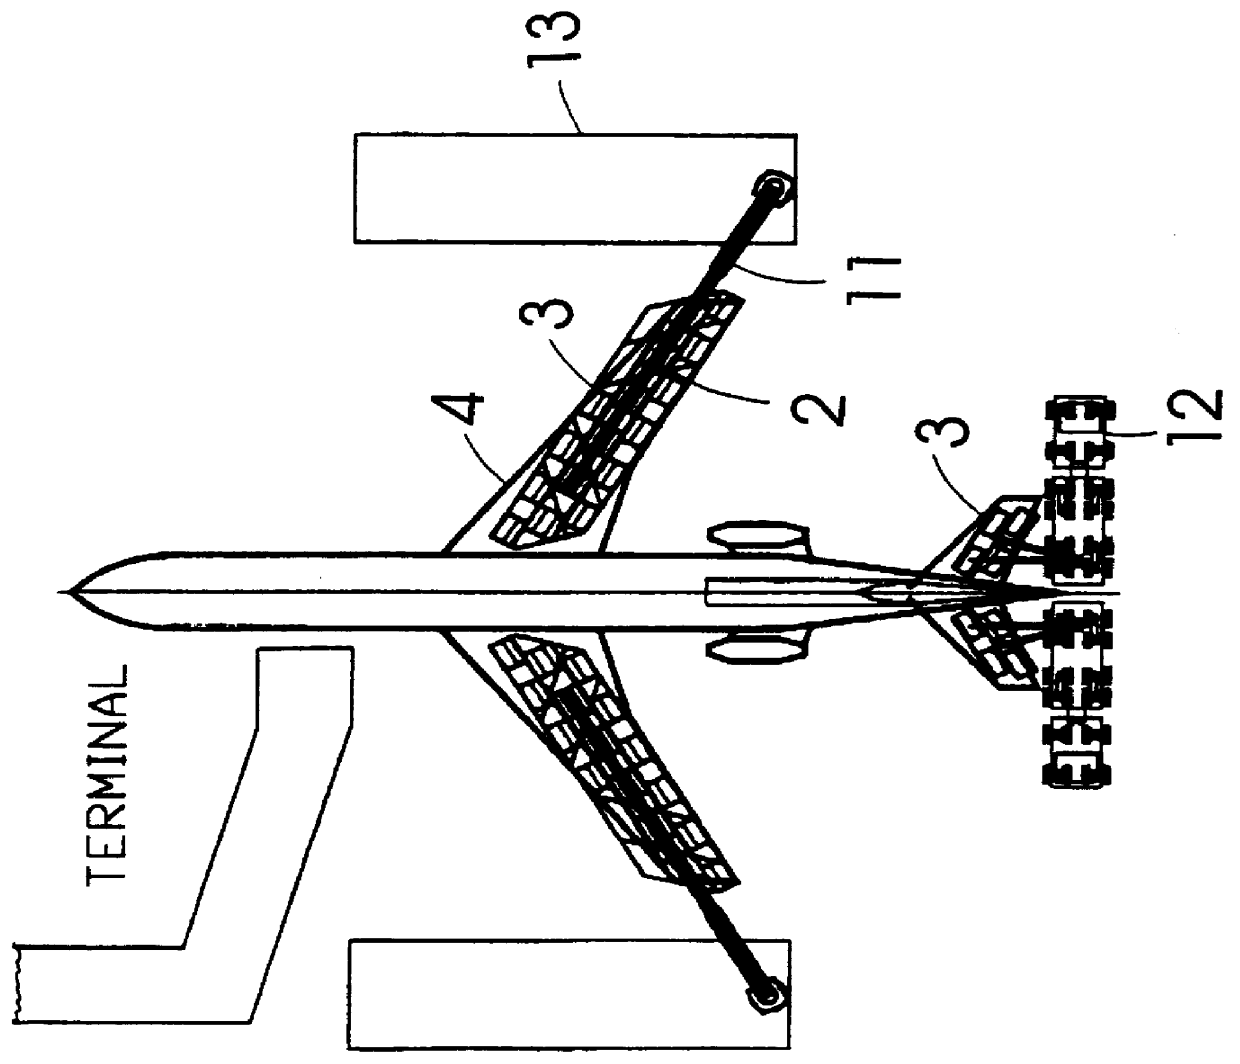 Infrared deicing system for aircraft